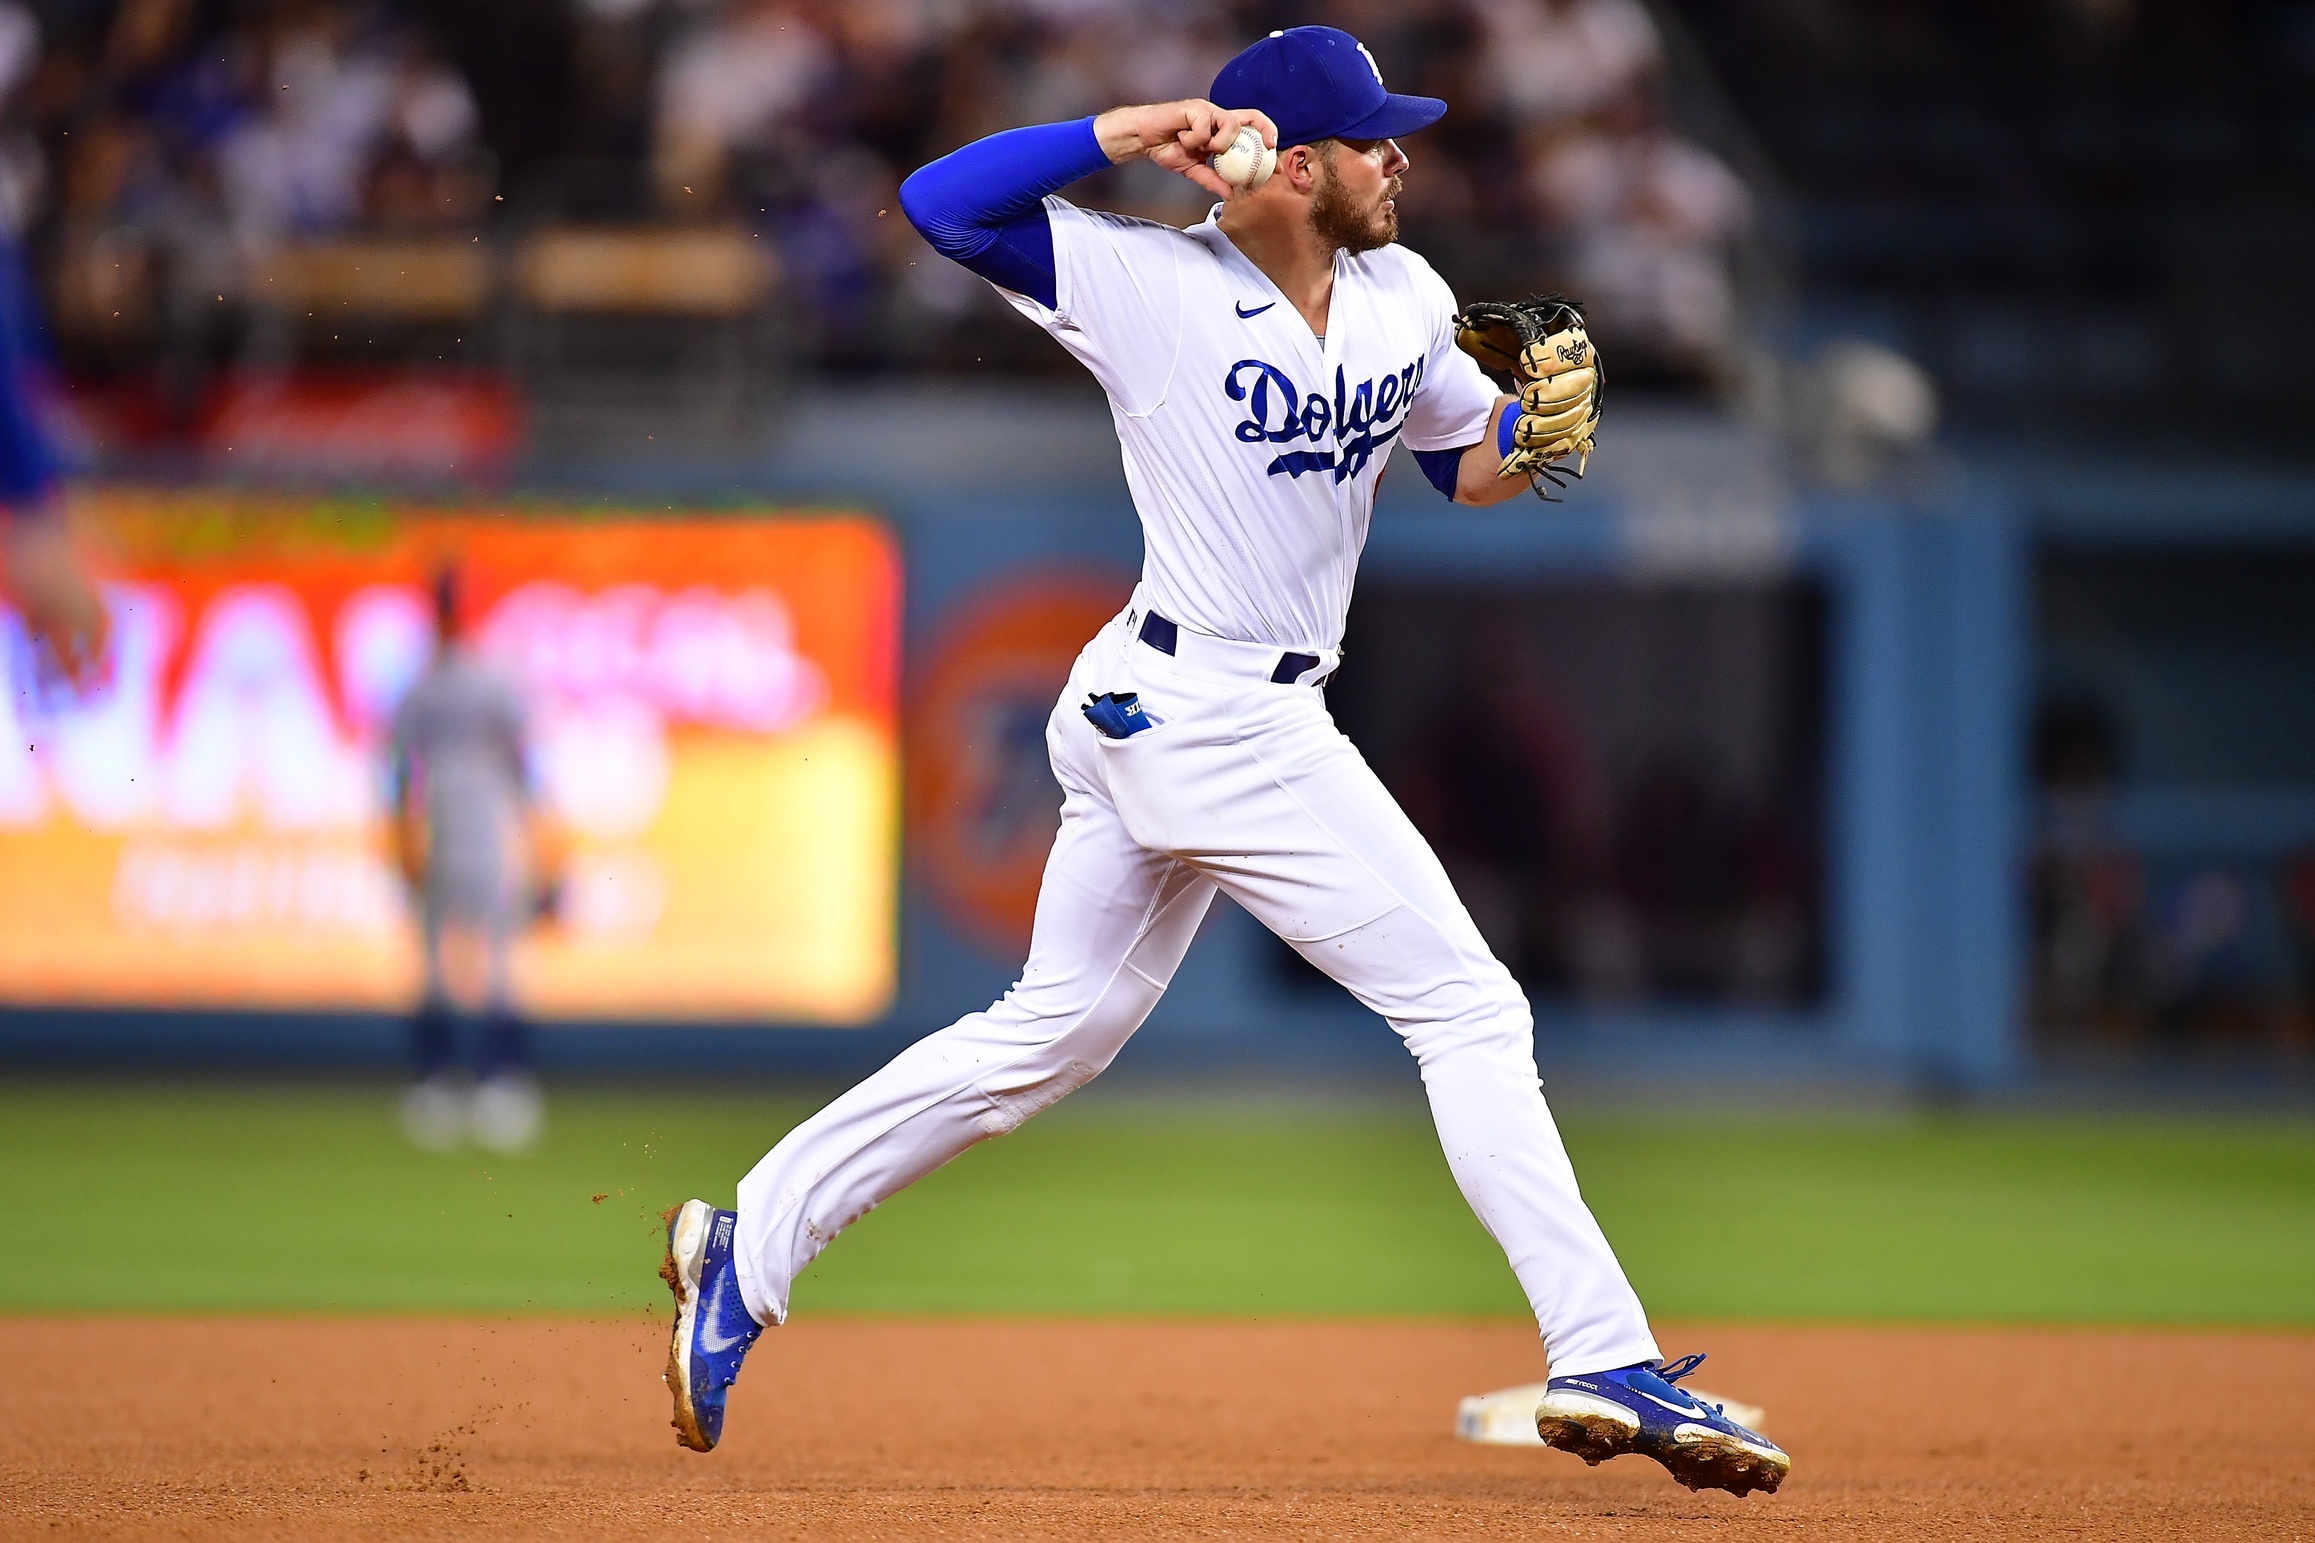 Dodgers Trust Gavin Lux To Help Keep Their Season Alive: 'I Loved The  Heartbeat, The Composure' — College Baseball, MLB Draft, Prospects -  Baseball America